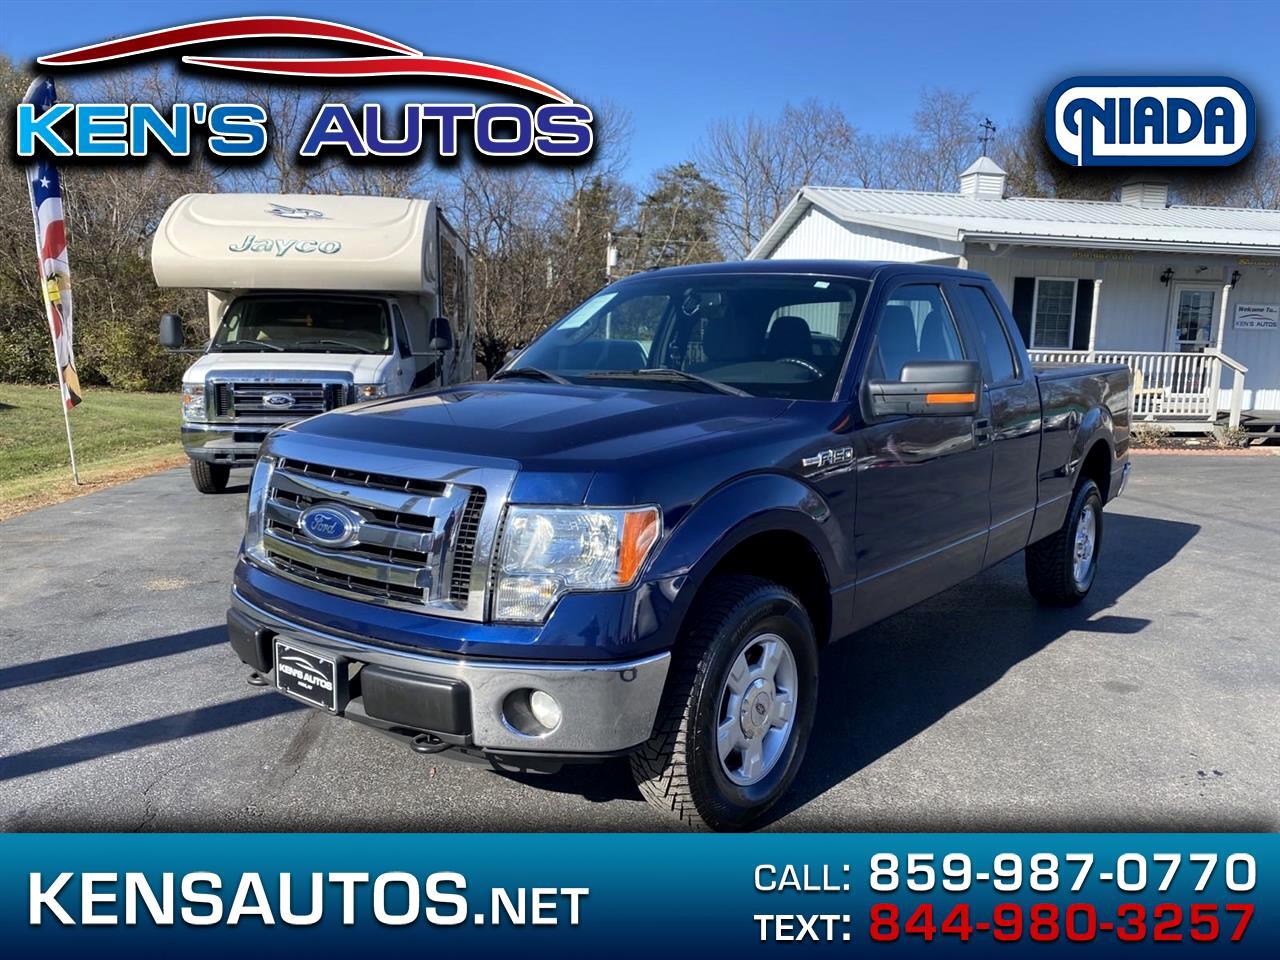 Ford F-150 4WD SuperCab 145" Lariat 2011